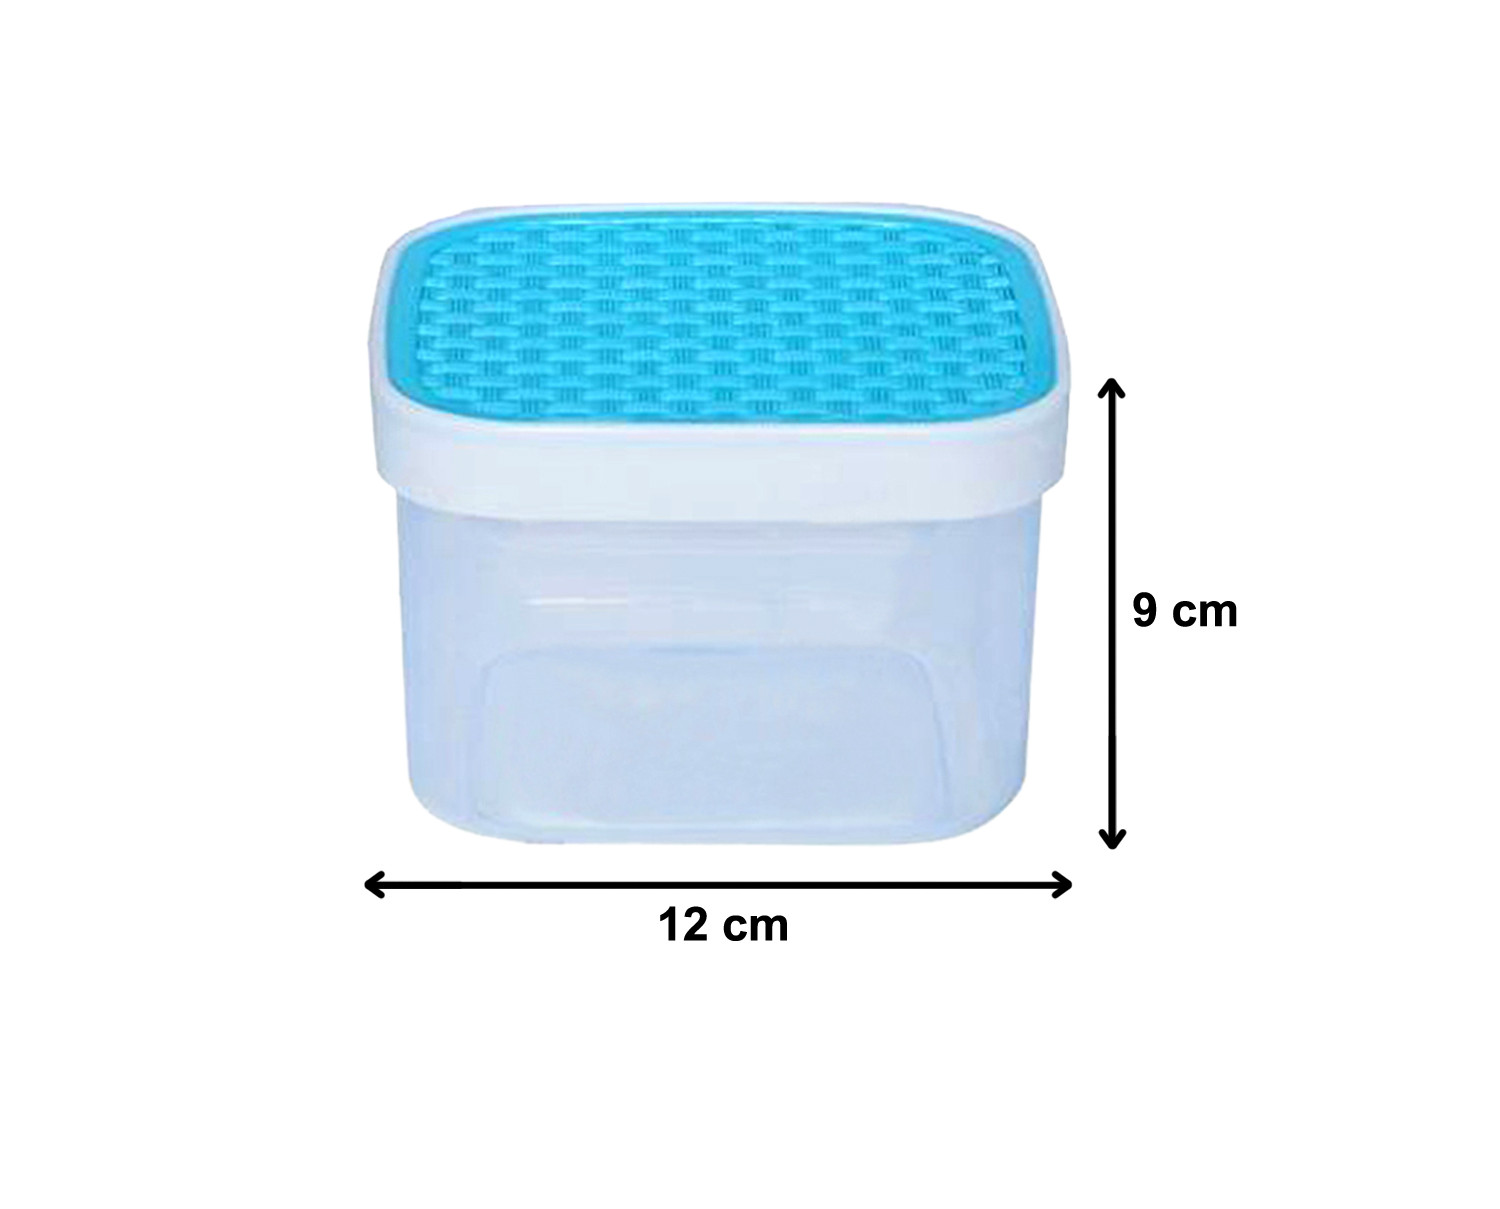 Kuber Industries Check Deisgn Lid  Multi Purpose Plastic Container,1200ml, Set of 6 (White & Blue)